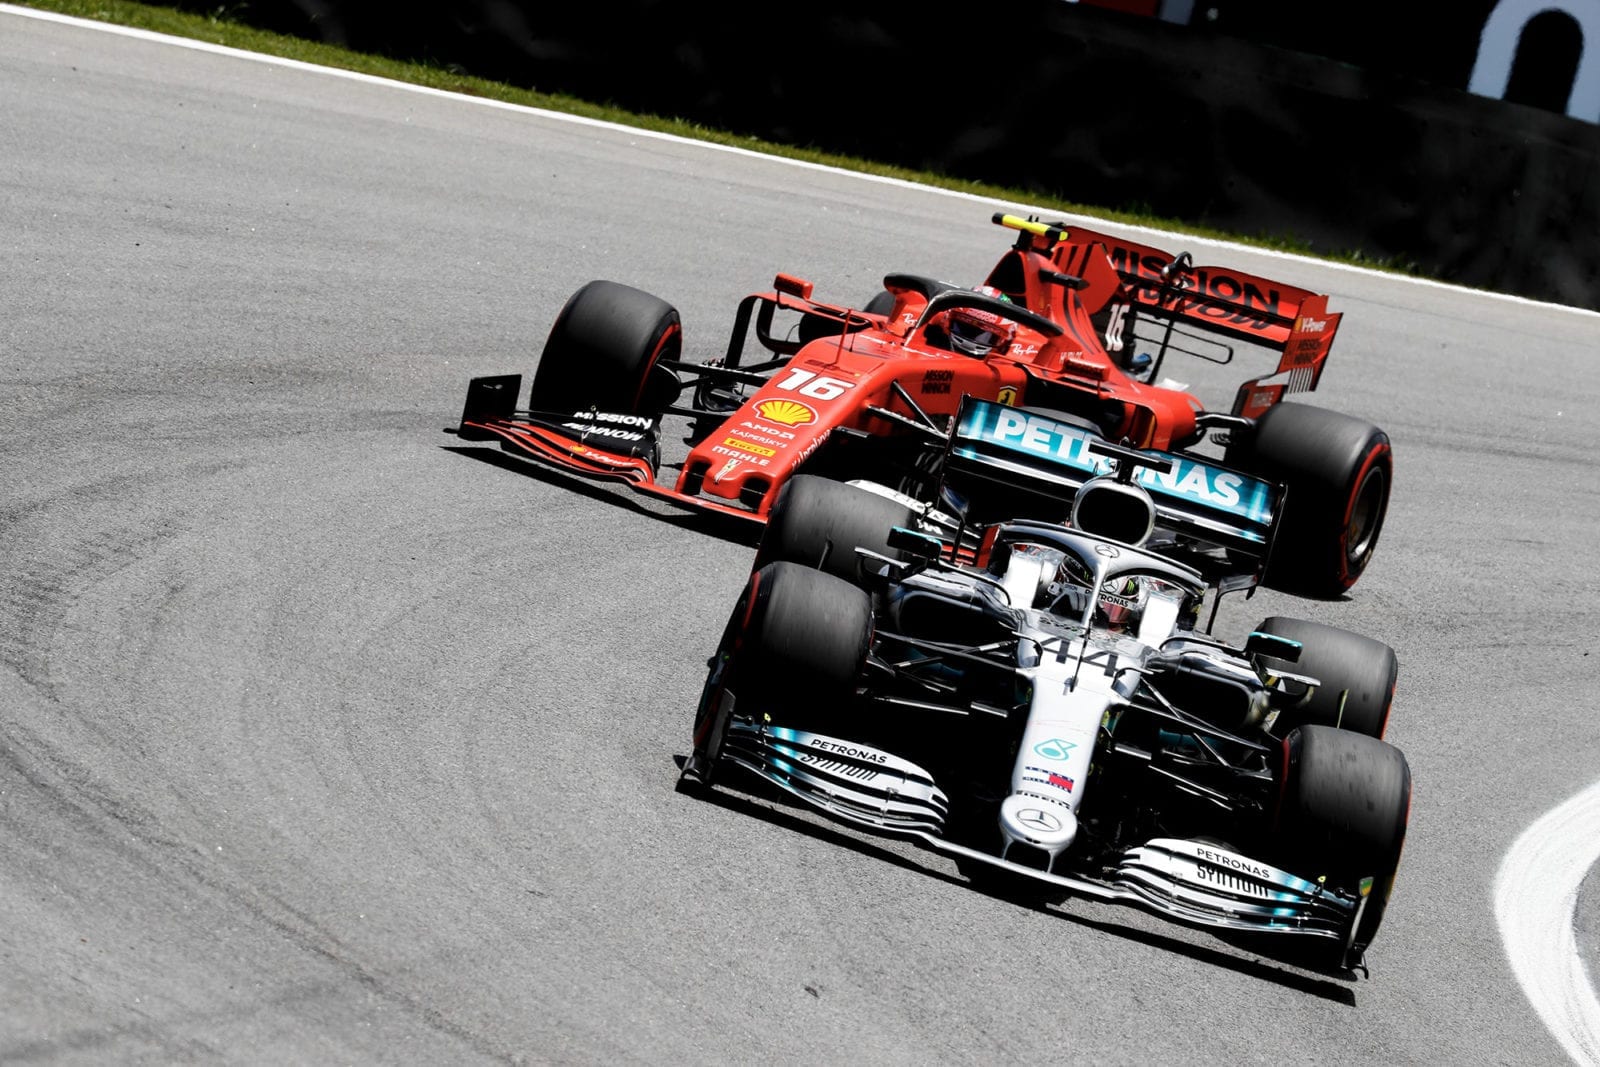 Charles Leclerc chases Lewis Hamilton in the 2019 F1 Brazilian Grand Prix